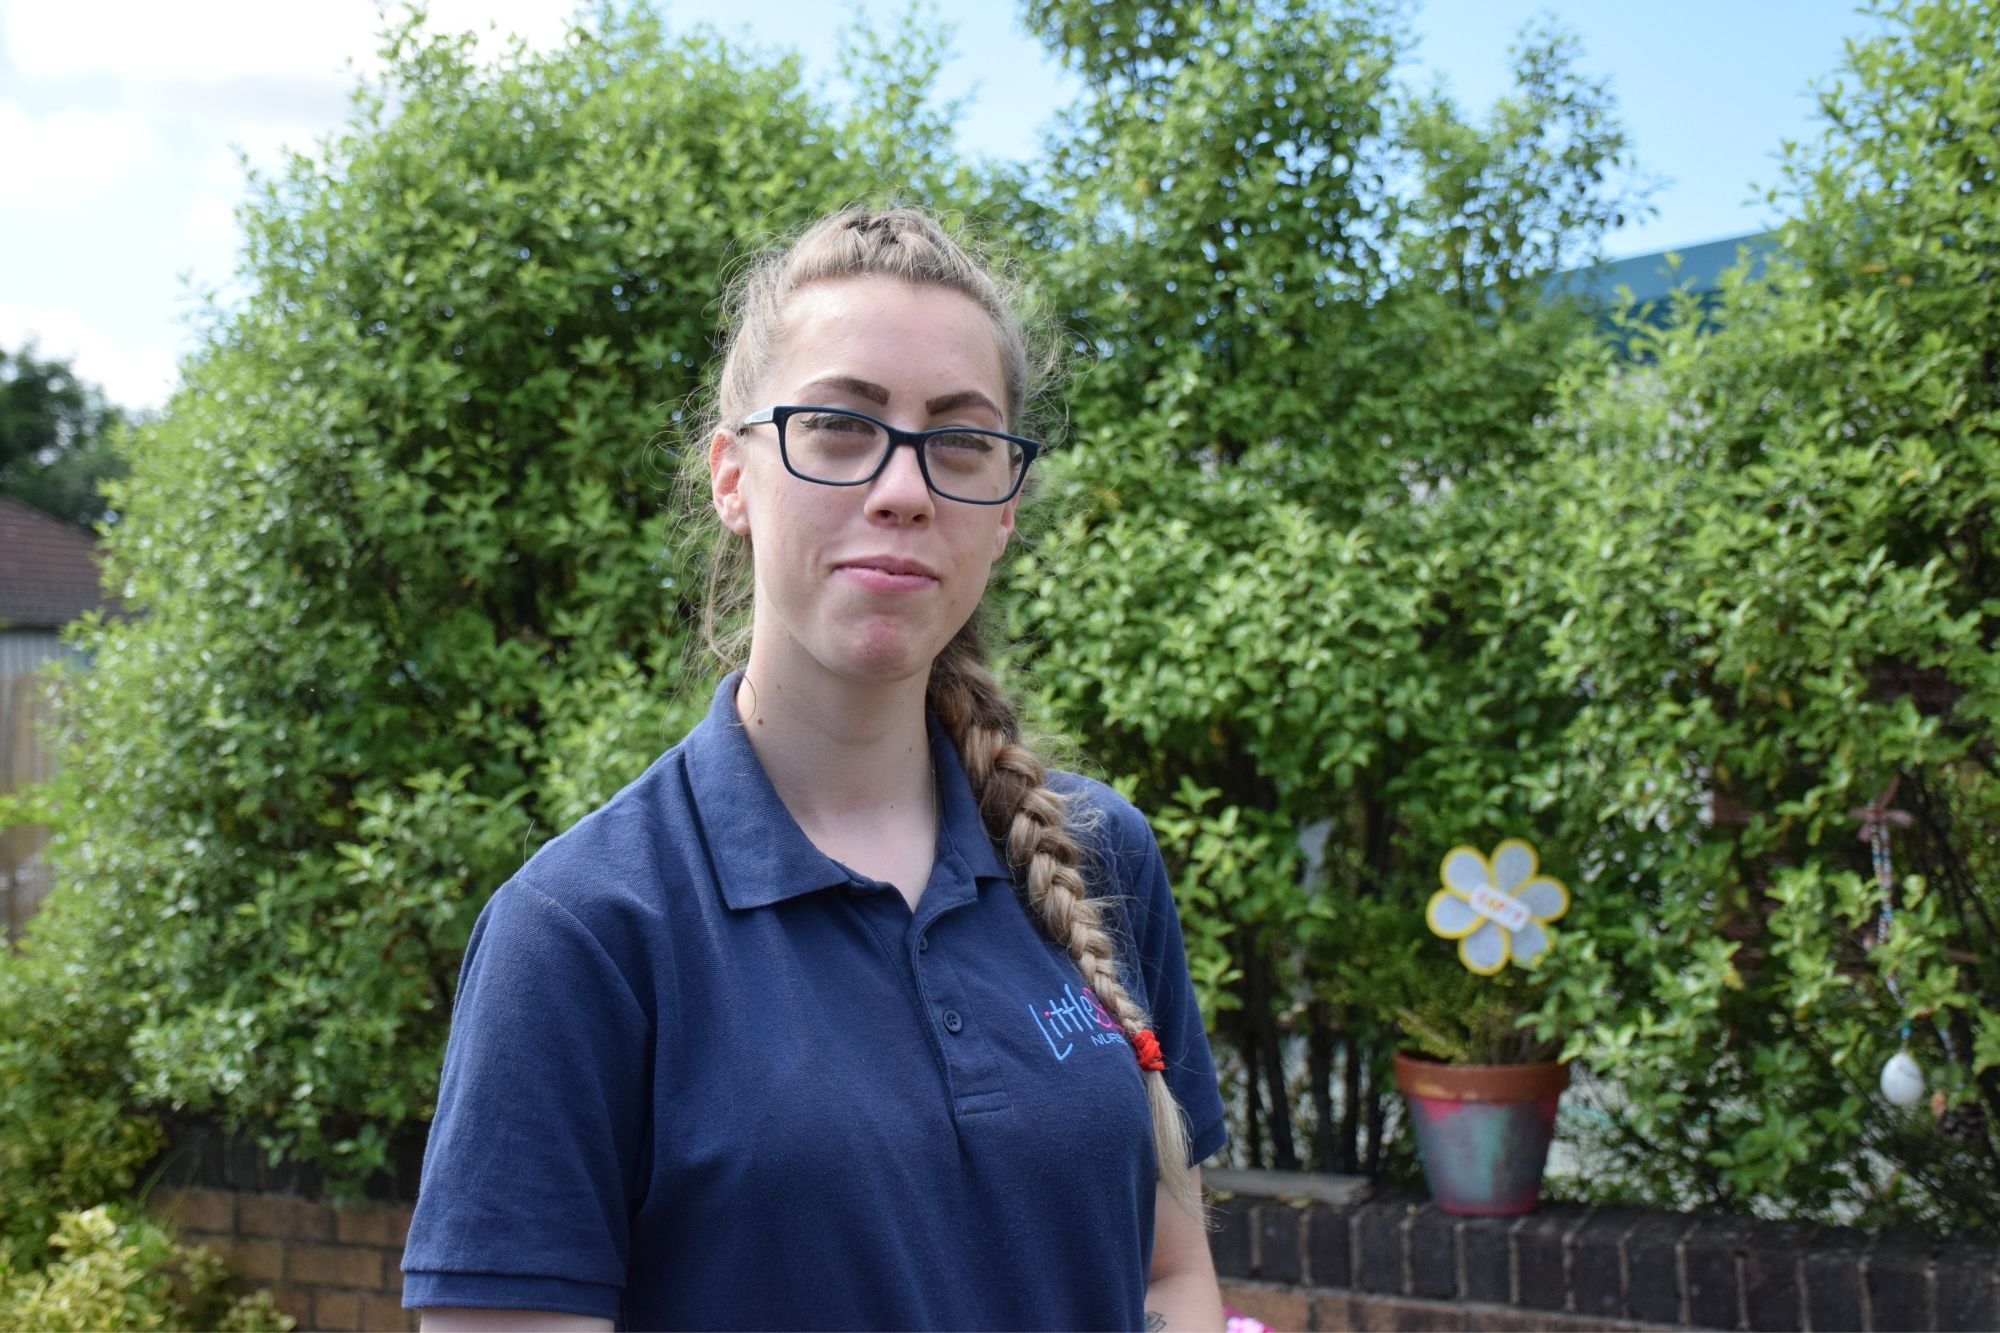 Accrington and Rossendale College student Chloe impresses on work placement to secure employment